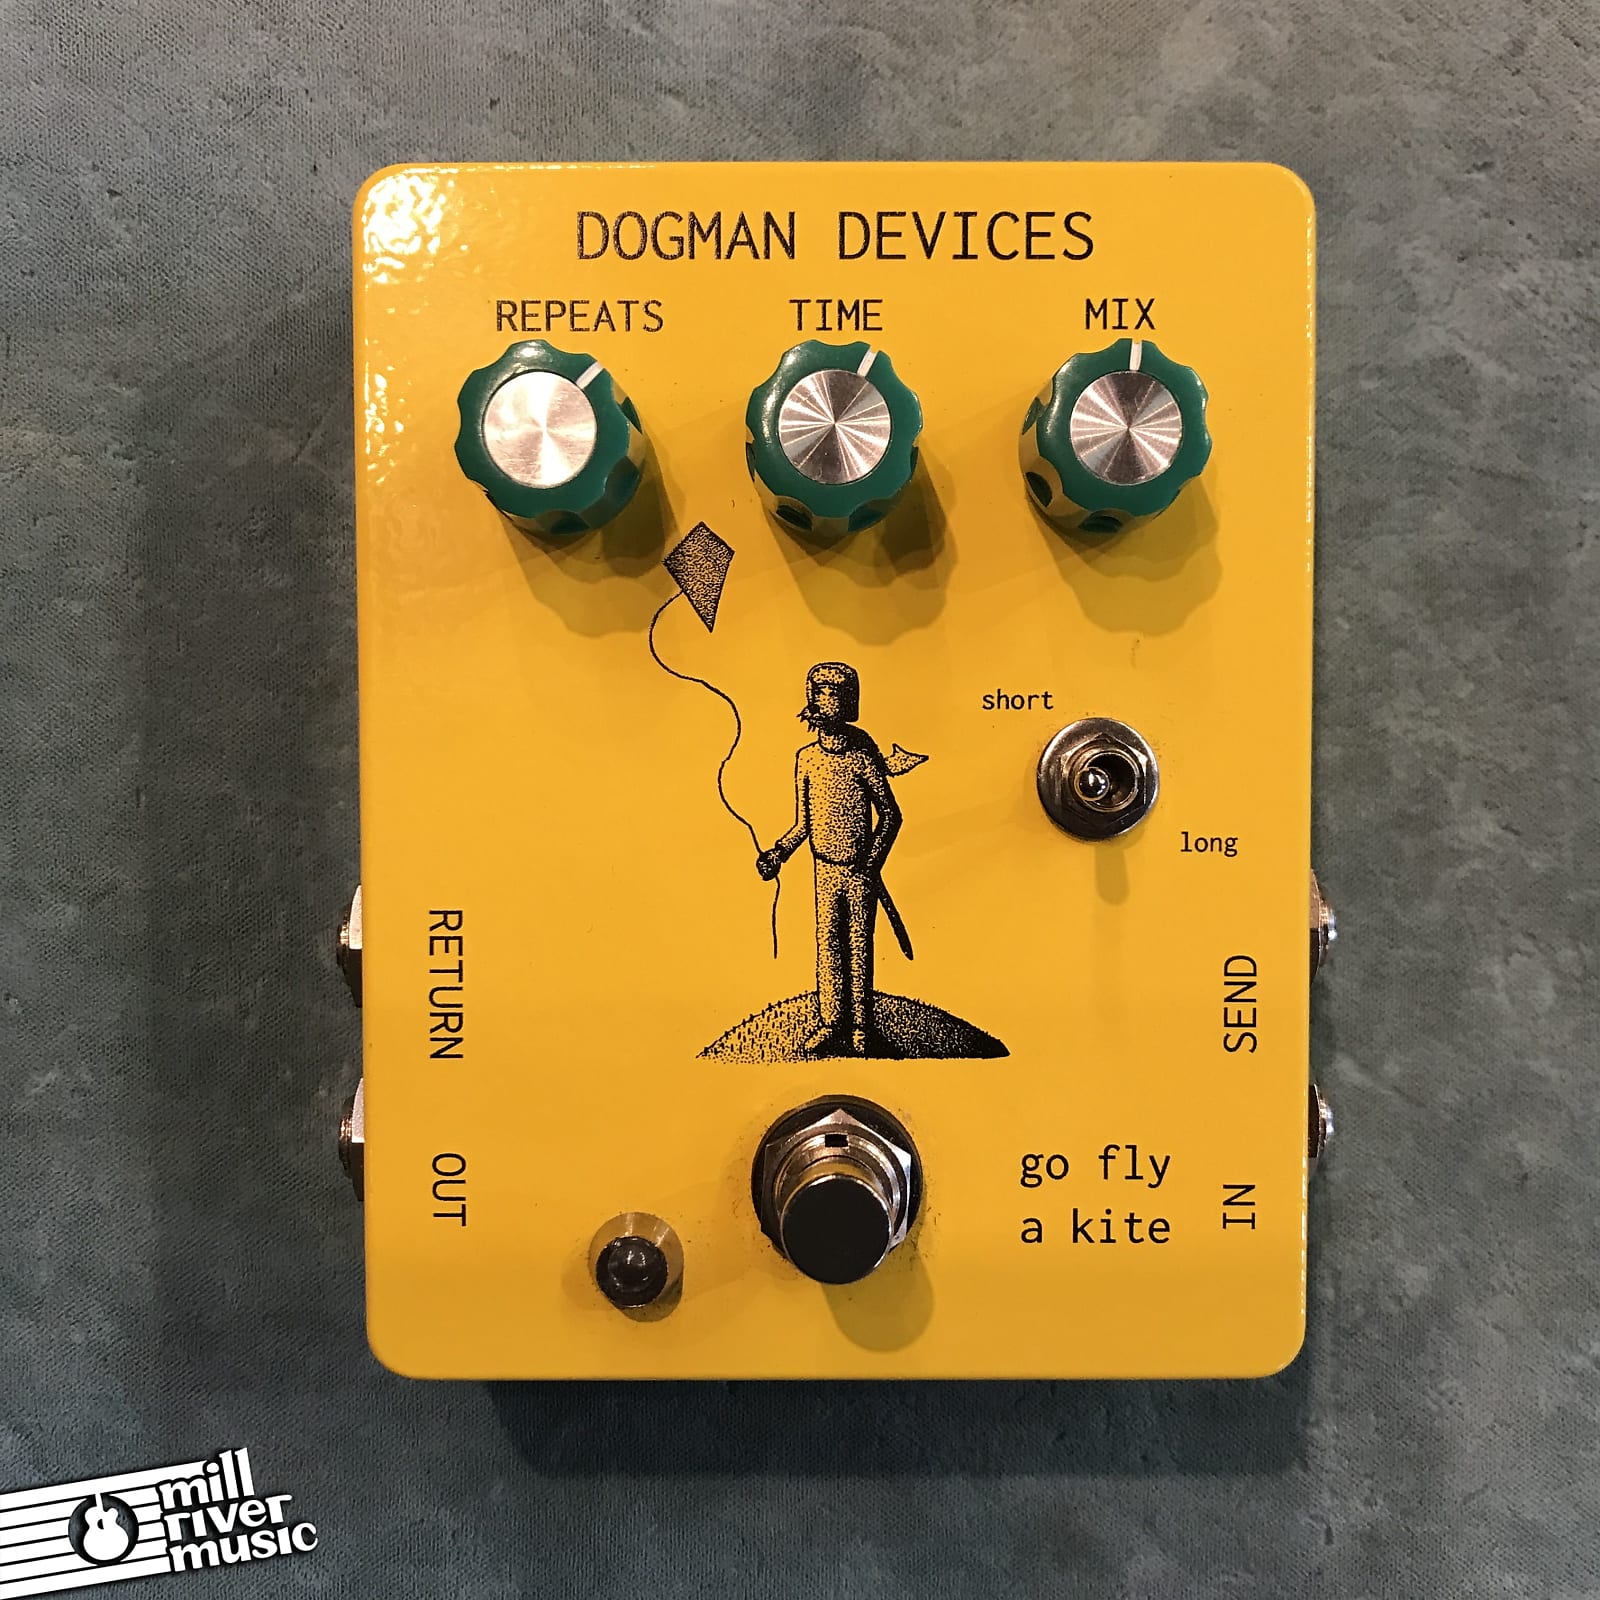 Dogman Devices Go Fly A Kite Delay Effects Pedal w/ Box